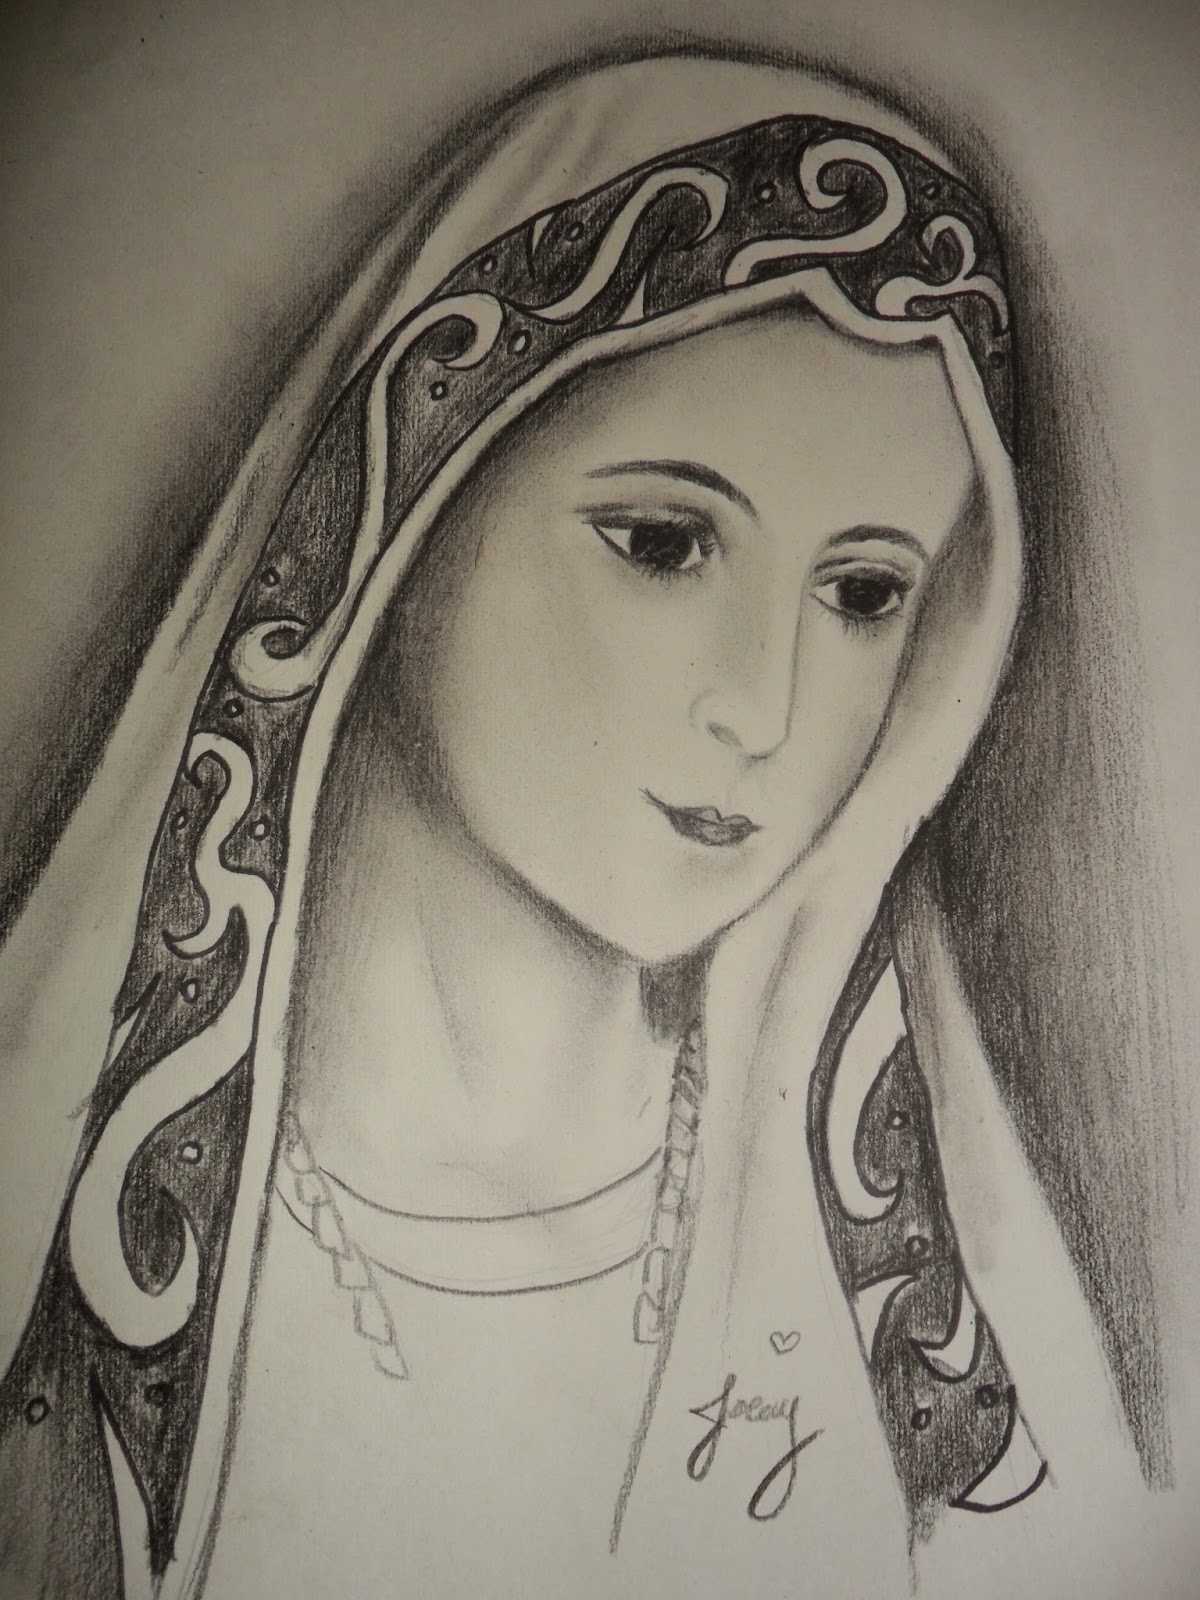 Curiousity Reviews with Joecy: Mama Mary's Portrait Pencil Speed